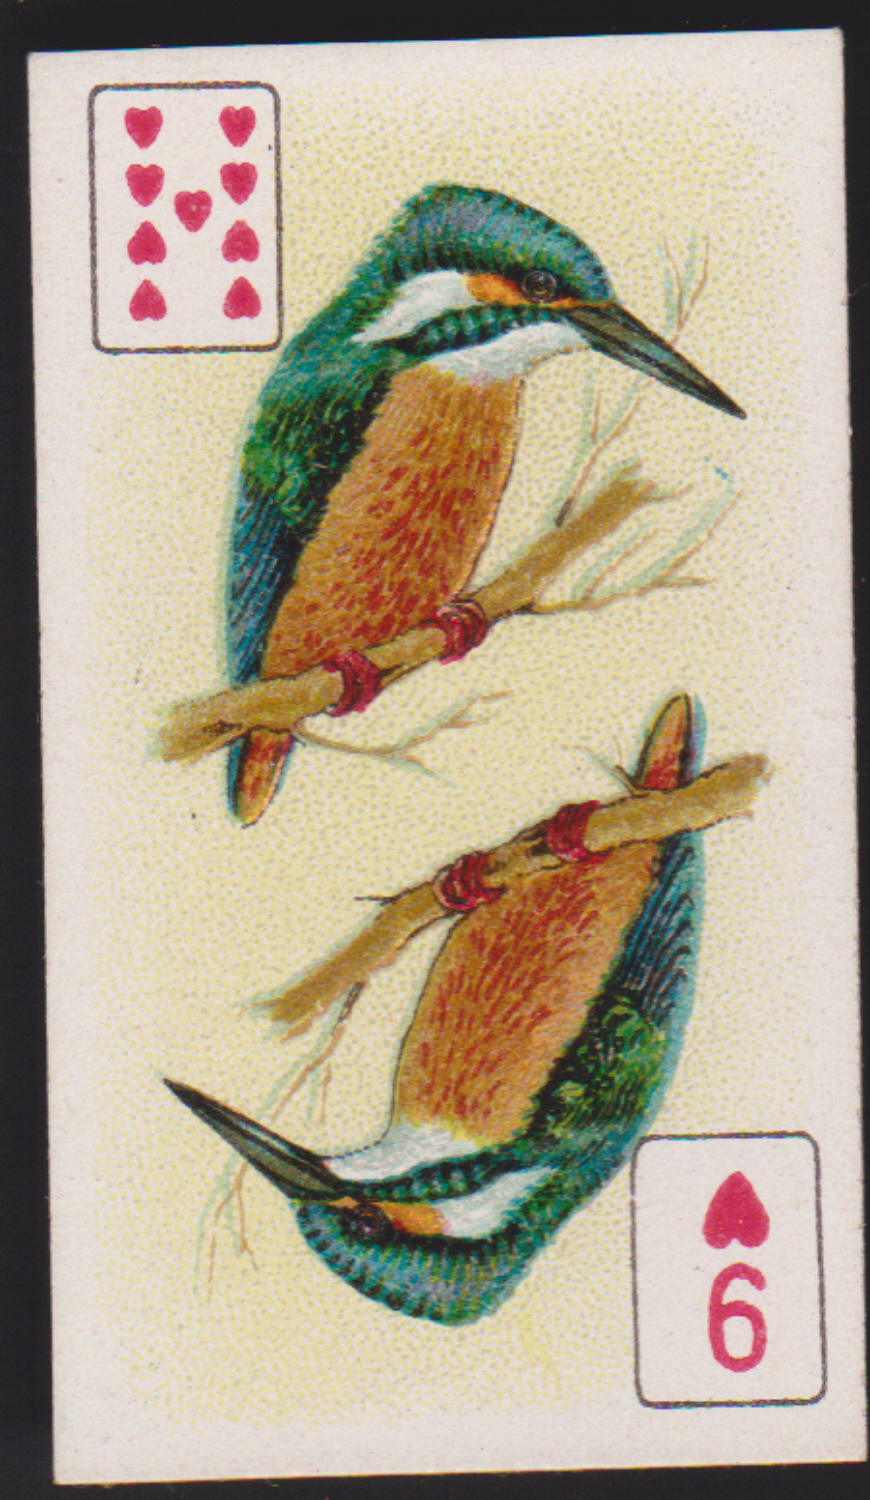 Wills Four Aces Issue Birds Breilliant Plumage P?C inset 9 hearts - Click Image to Close